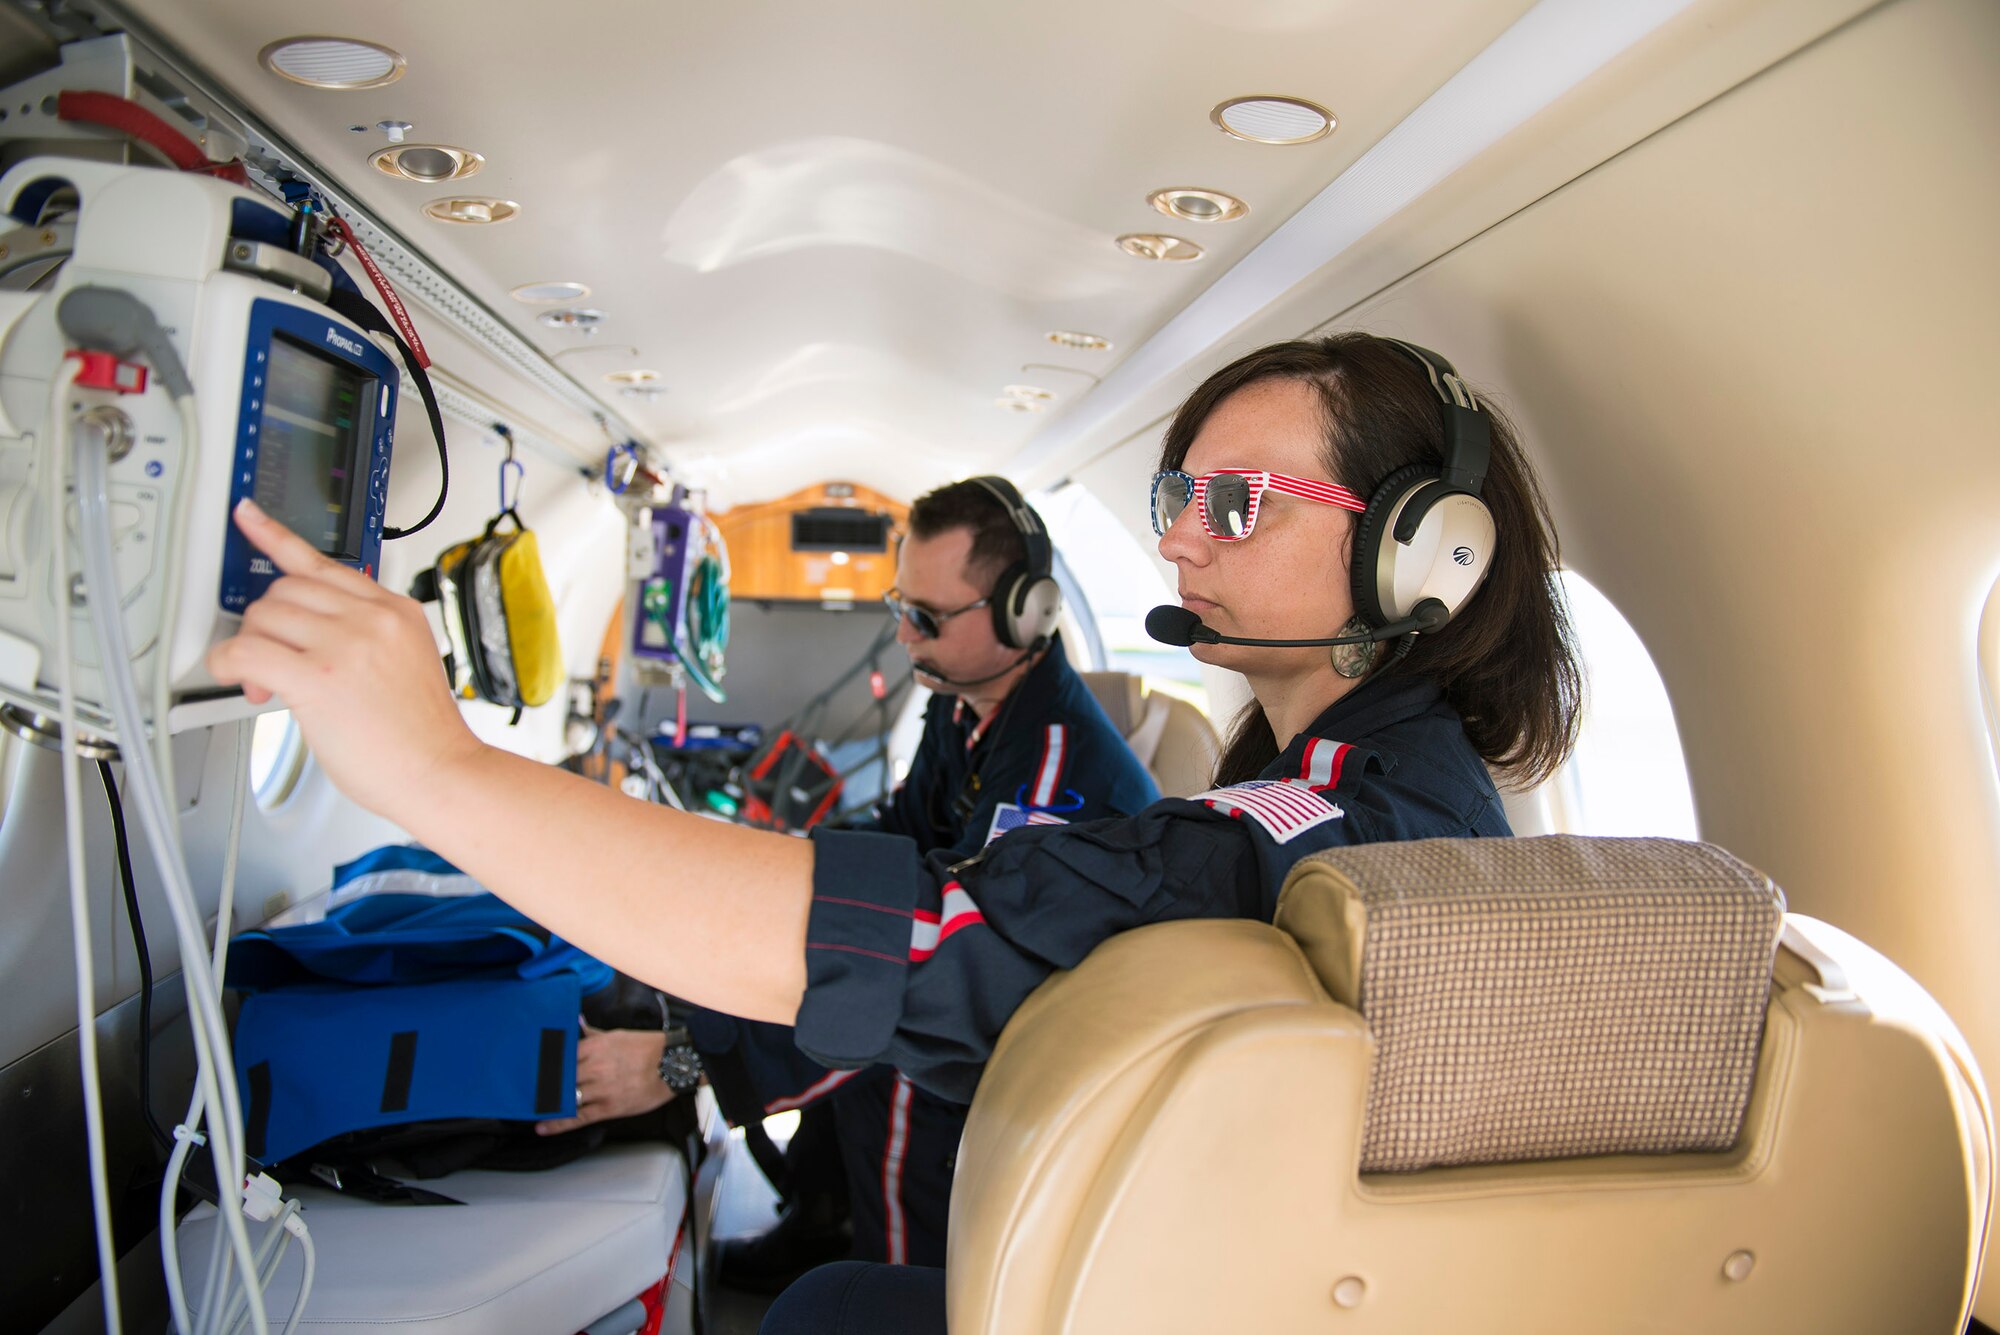 Air Medical Service members Stephanie Sapp, flight nurse, right, and Zachary Nicholson, flight paramedic, perform a daily check during a pre-flight assessment at a local airport, July 13, 2016, in Valdosta, Ga. Their responsibilities are to provide emergent medical care as U.S. Air Force Master Sgt. Rusty Harrell, 476th Fighter Group career assistance advisor and civilian medic pilot, aerially lifts patients to ambulatory care across the southeastern United States. (U.S. Air Force photo by Airman 1st Class Greg Nash)